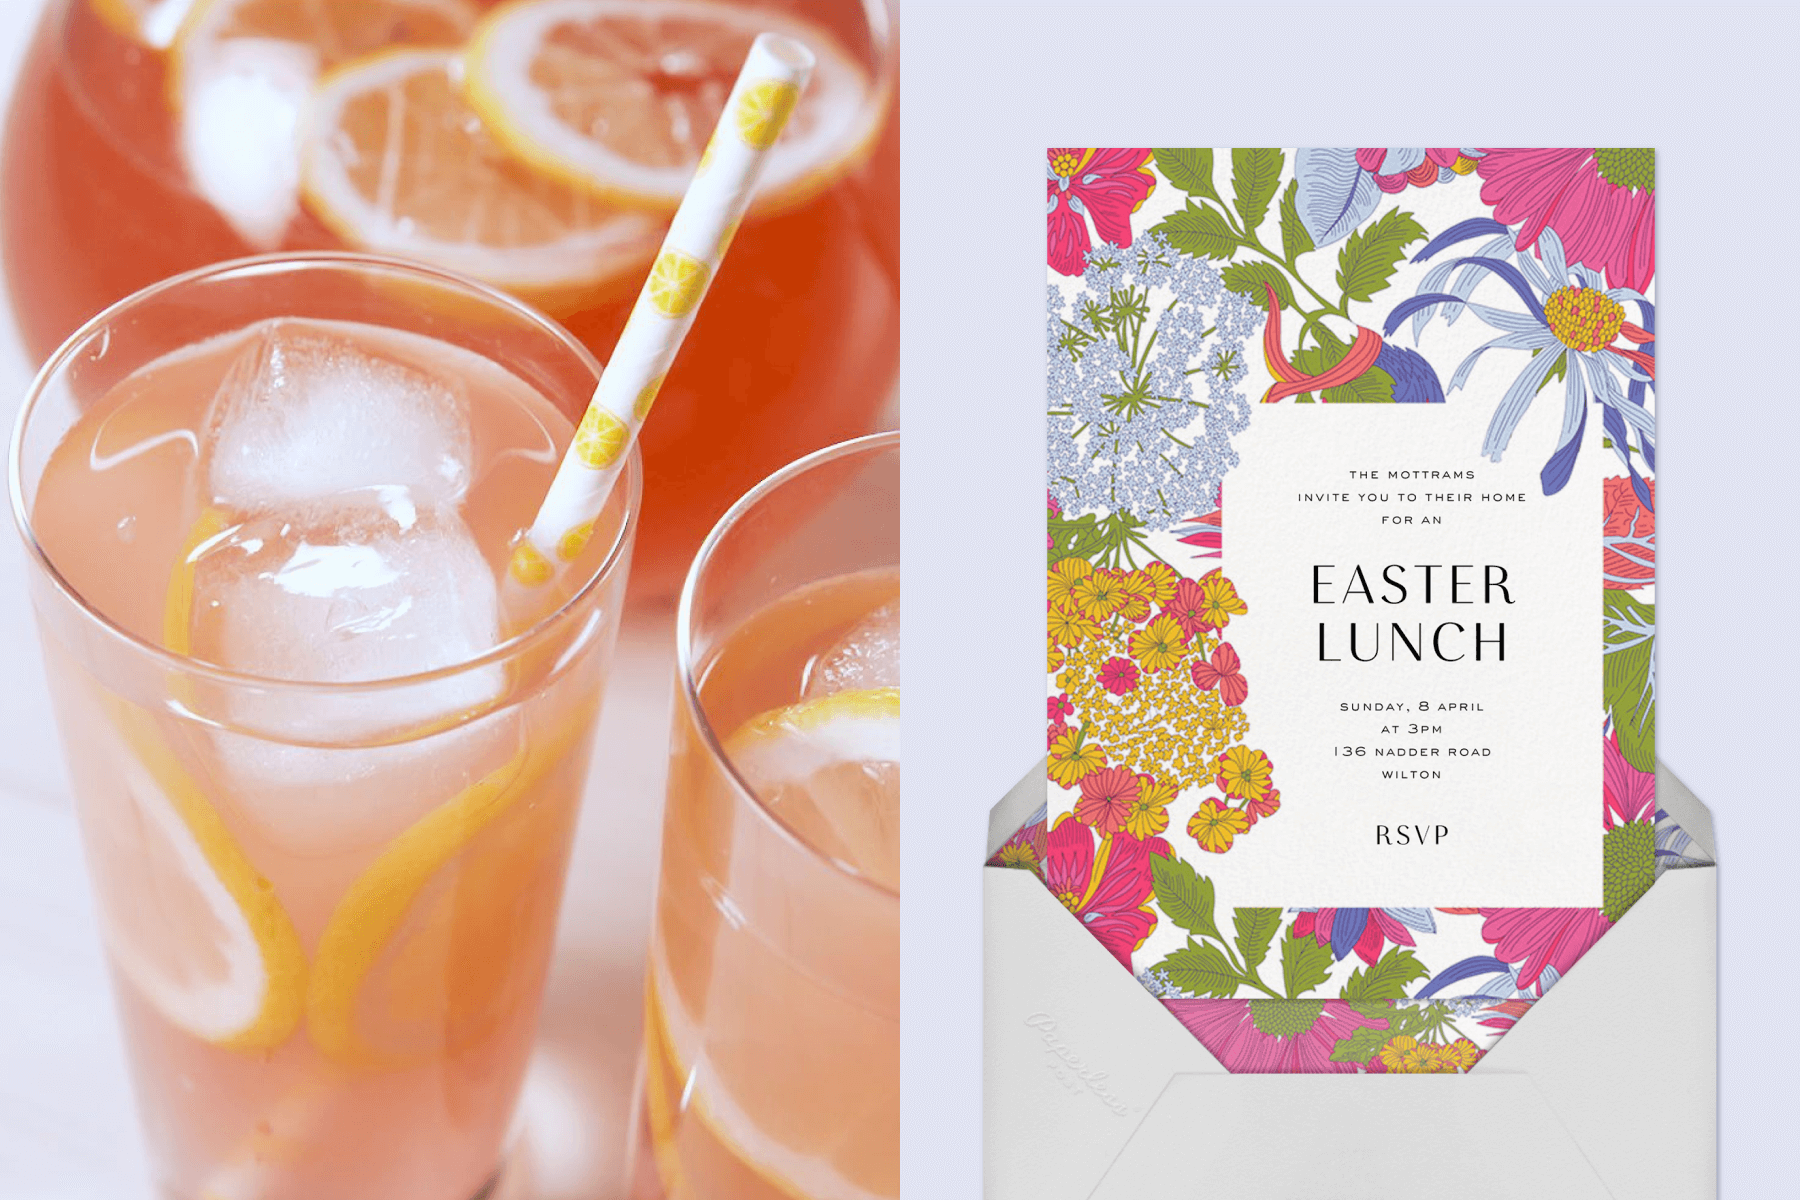 Left: Citrusy drinks with straws. Right: An Easter invitation with colorful flowers around the border.